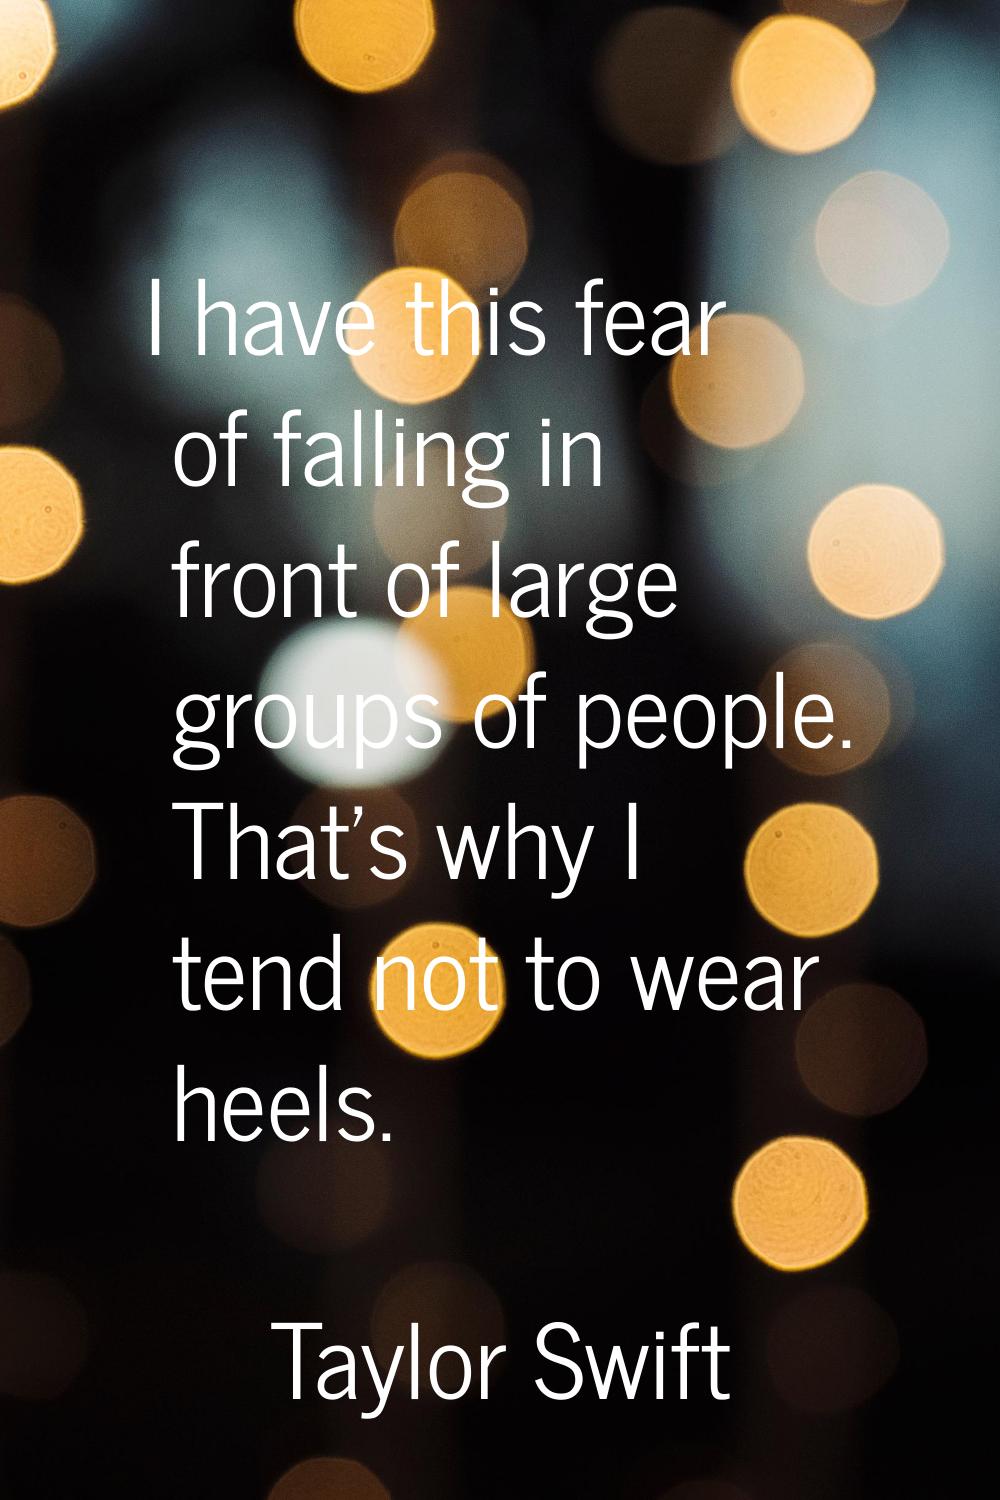 I have this fear of falling in front of large groups of people. That's why I tend not to wear heels